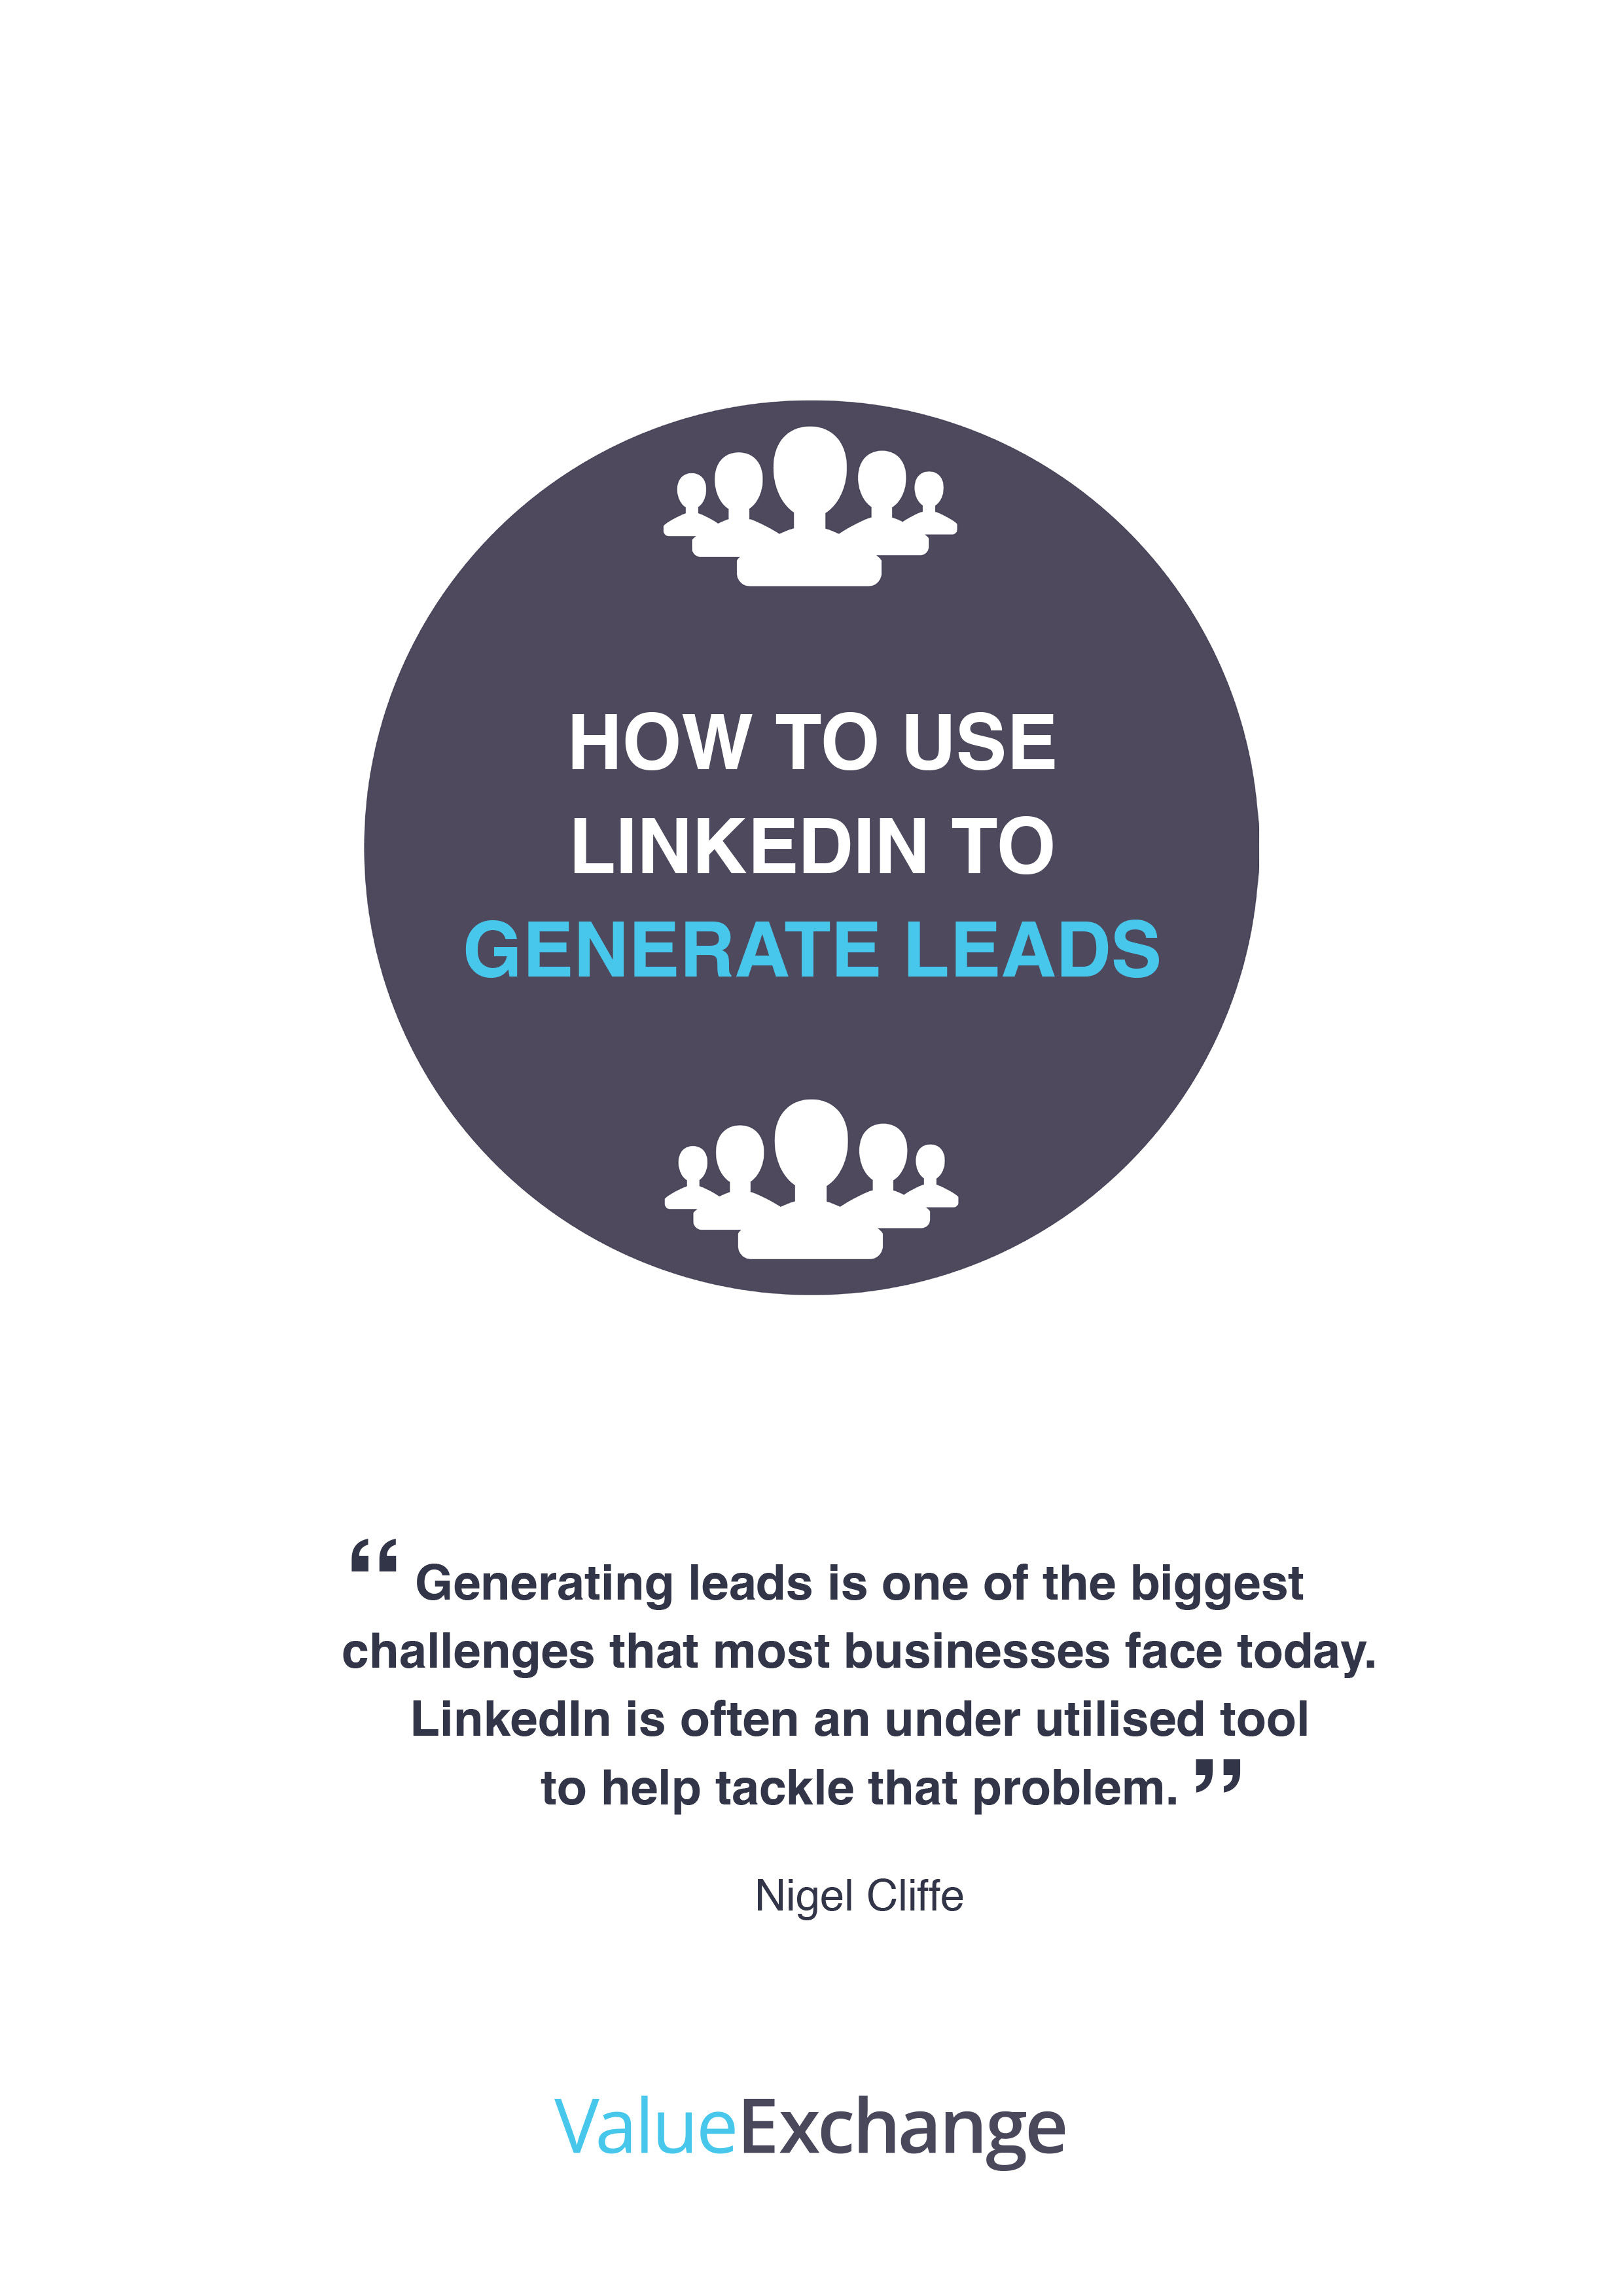 How to Use LinkedIn to Generate Leads by Nigel Cliffe